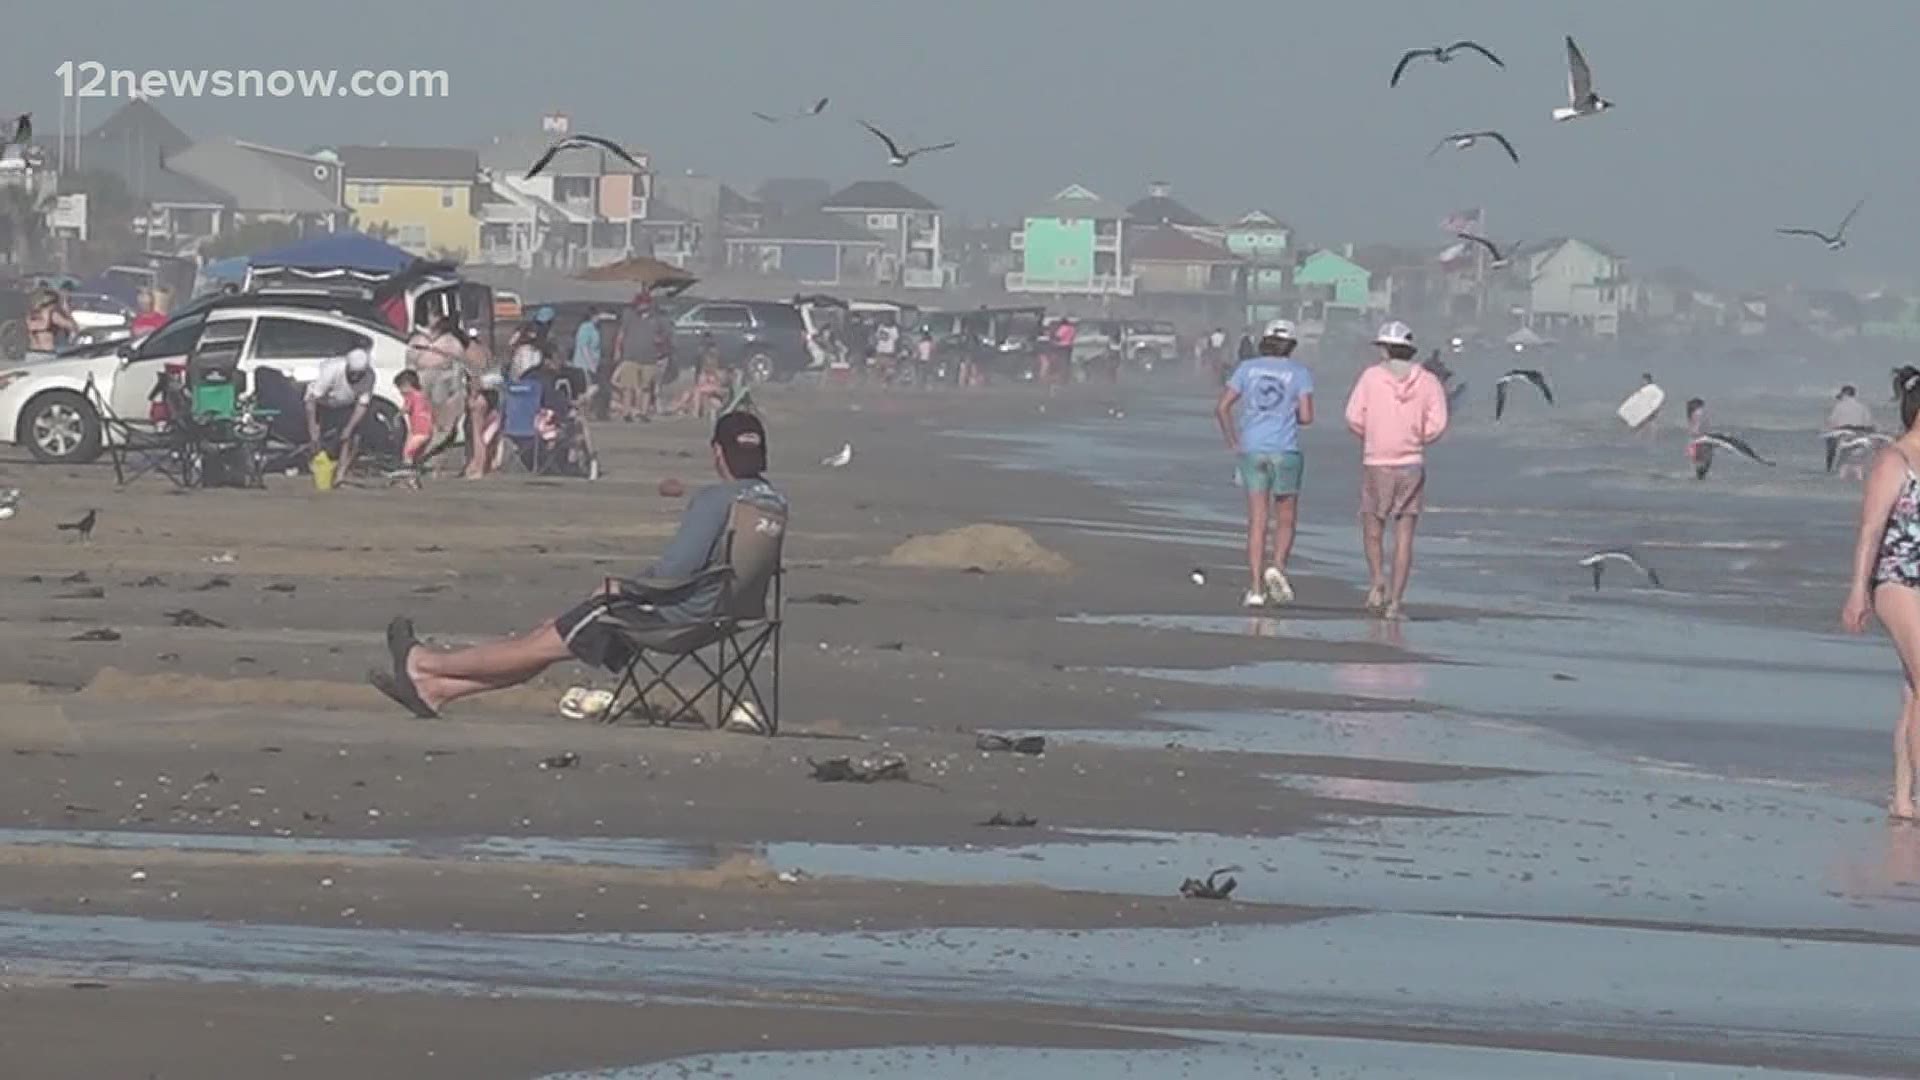 Galveston County is preparing for an expected busy spring break since many COVID-19 restrictions have been lifted.